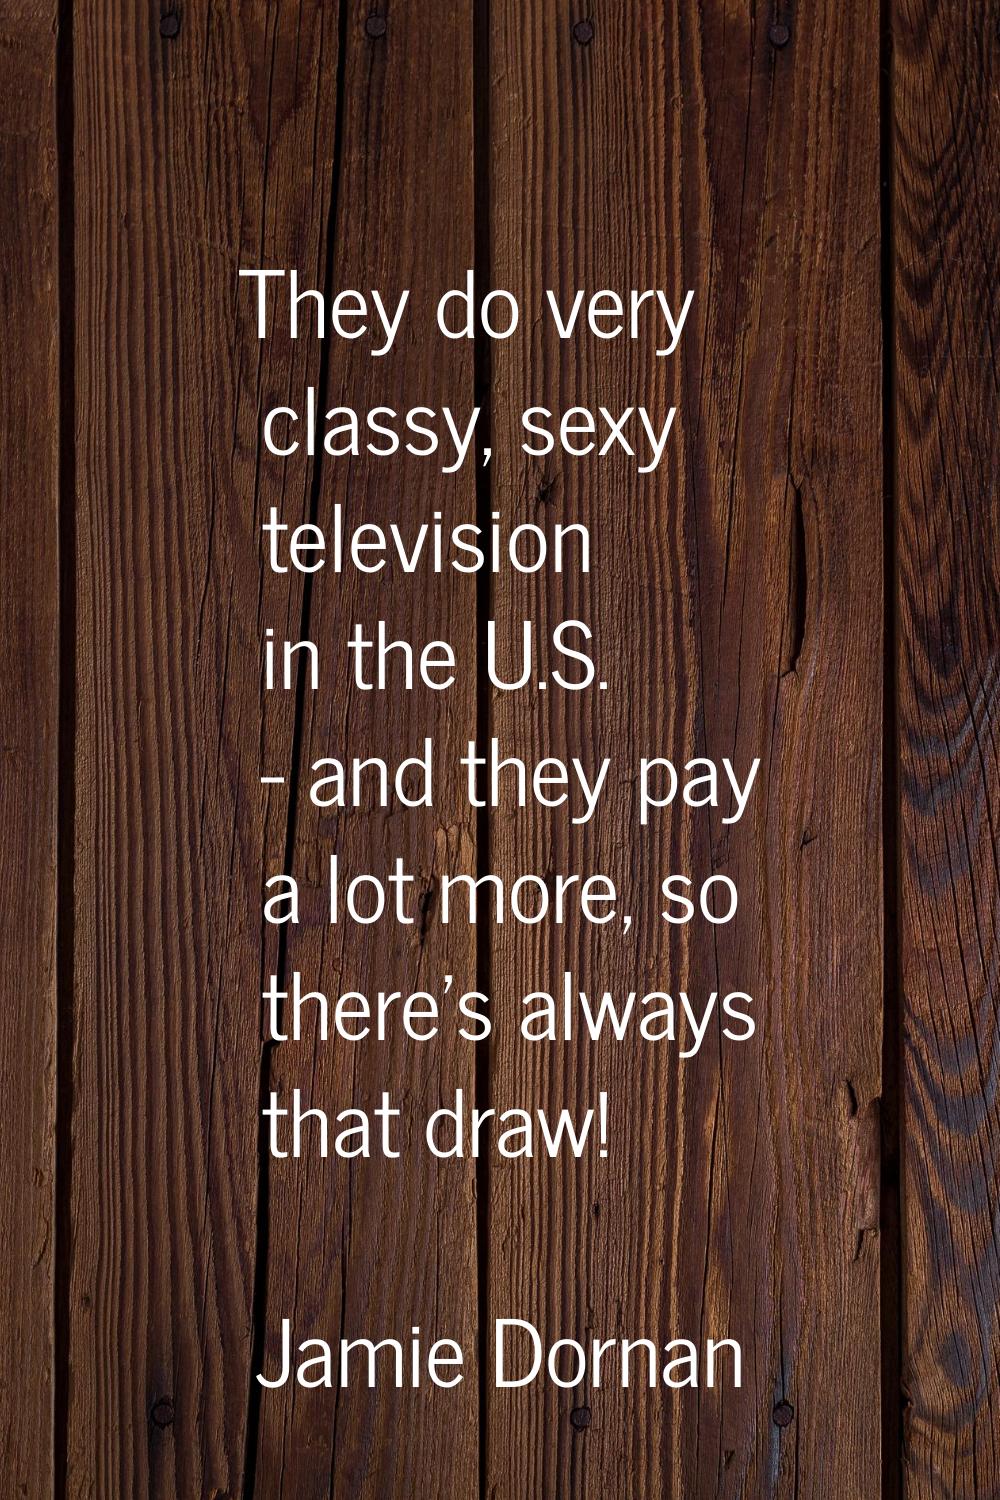 They do very classy, sexy television in the U.S. - and they pay a lot more, so there's always that 